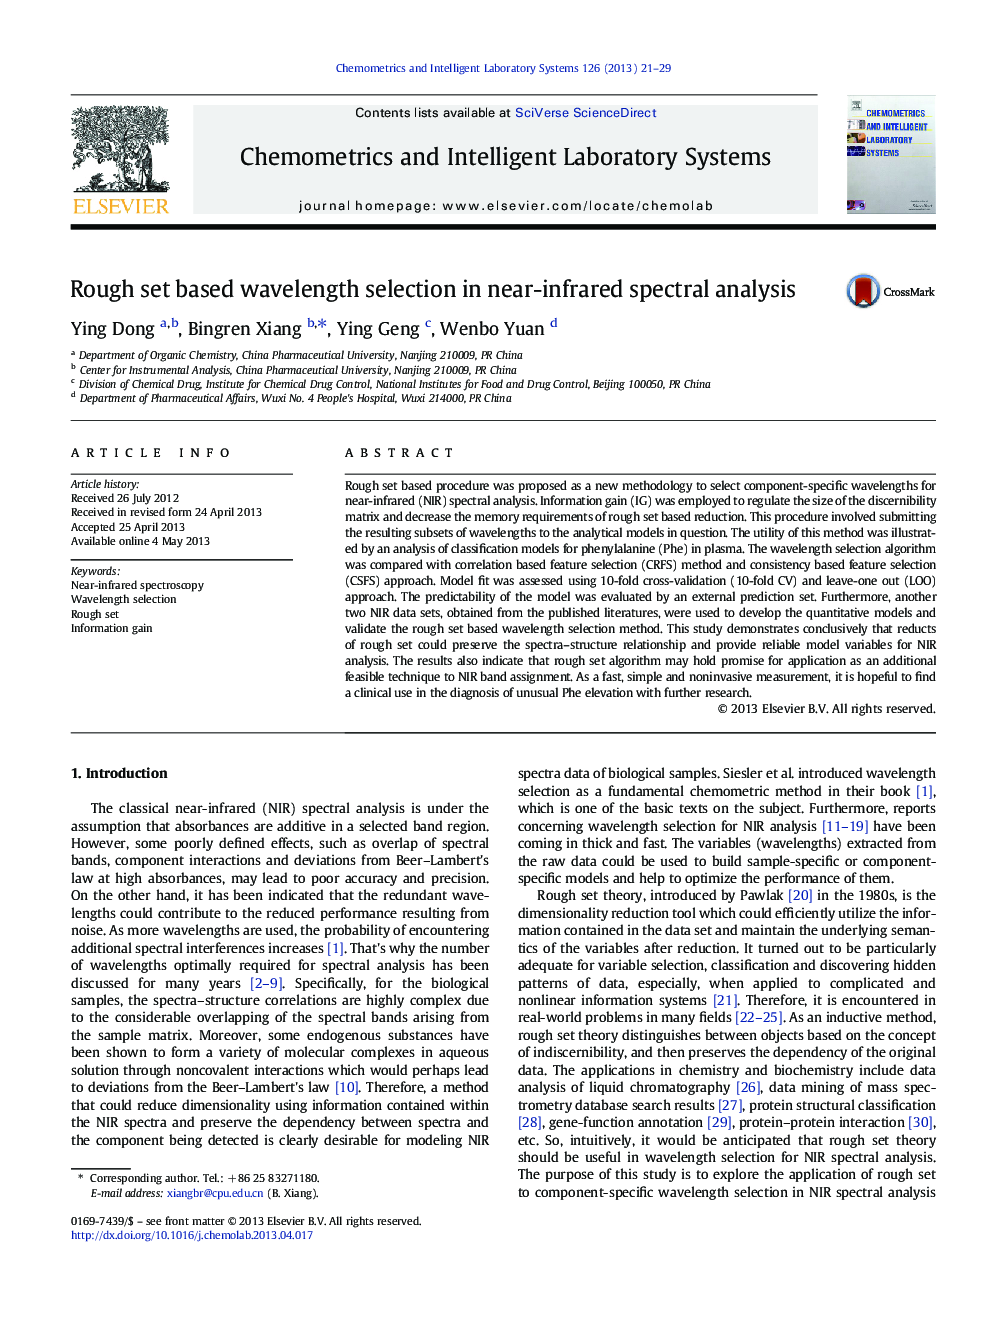 Rough set based wavelength selection in near-infrared spectral analysis